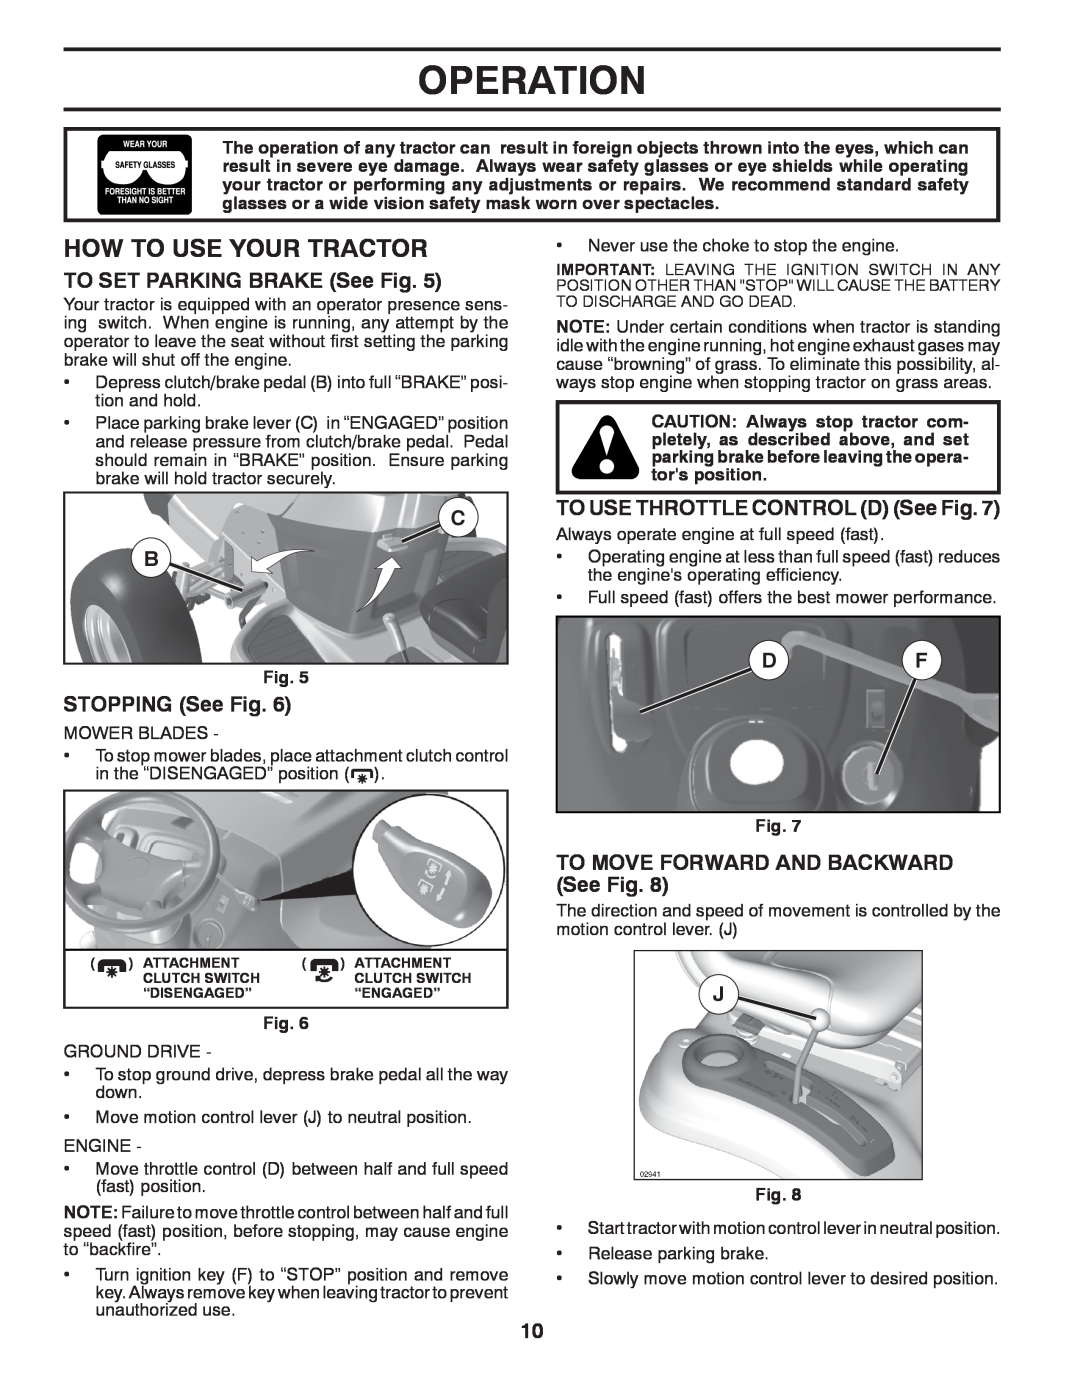 Ariens 935335 42 manual How To Use Your Tractor, Operation, TO SET PARKING BRAKE See Fig, STOPPING See Fig 